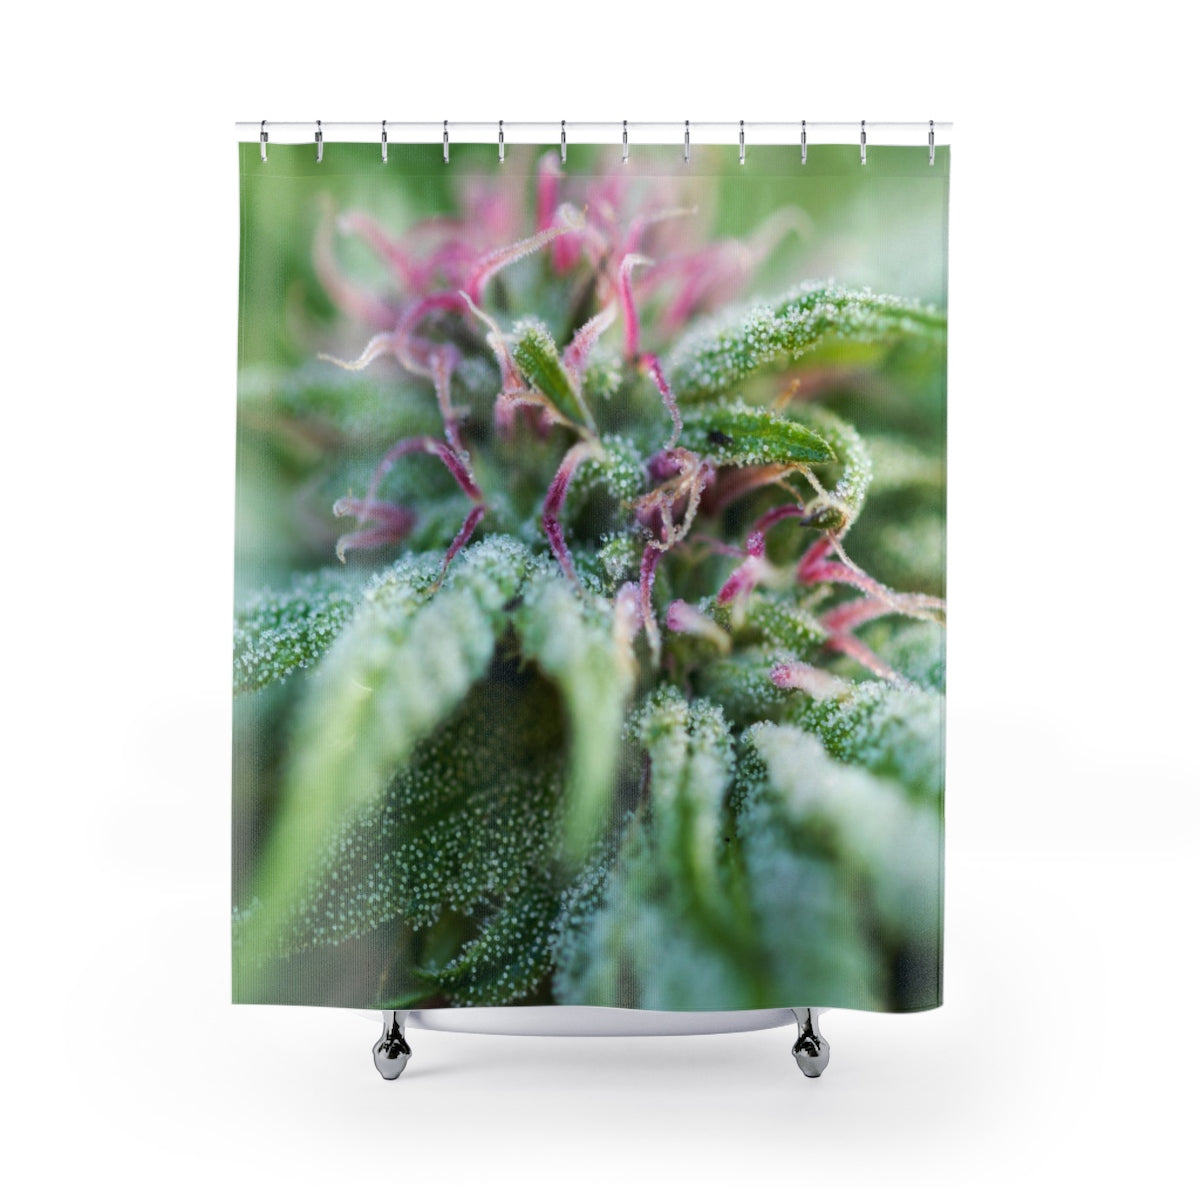 Blooming With Purple Cannabis Custom Designed Shower Curtain.  A Unique Cannabis Gift For Friends & Family. Cannabis Dec For Your Home.